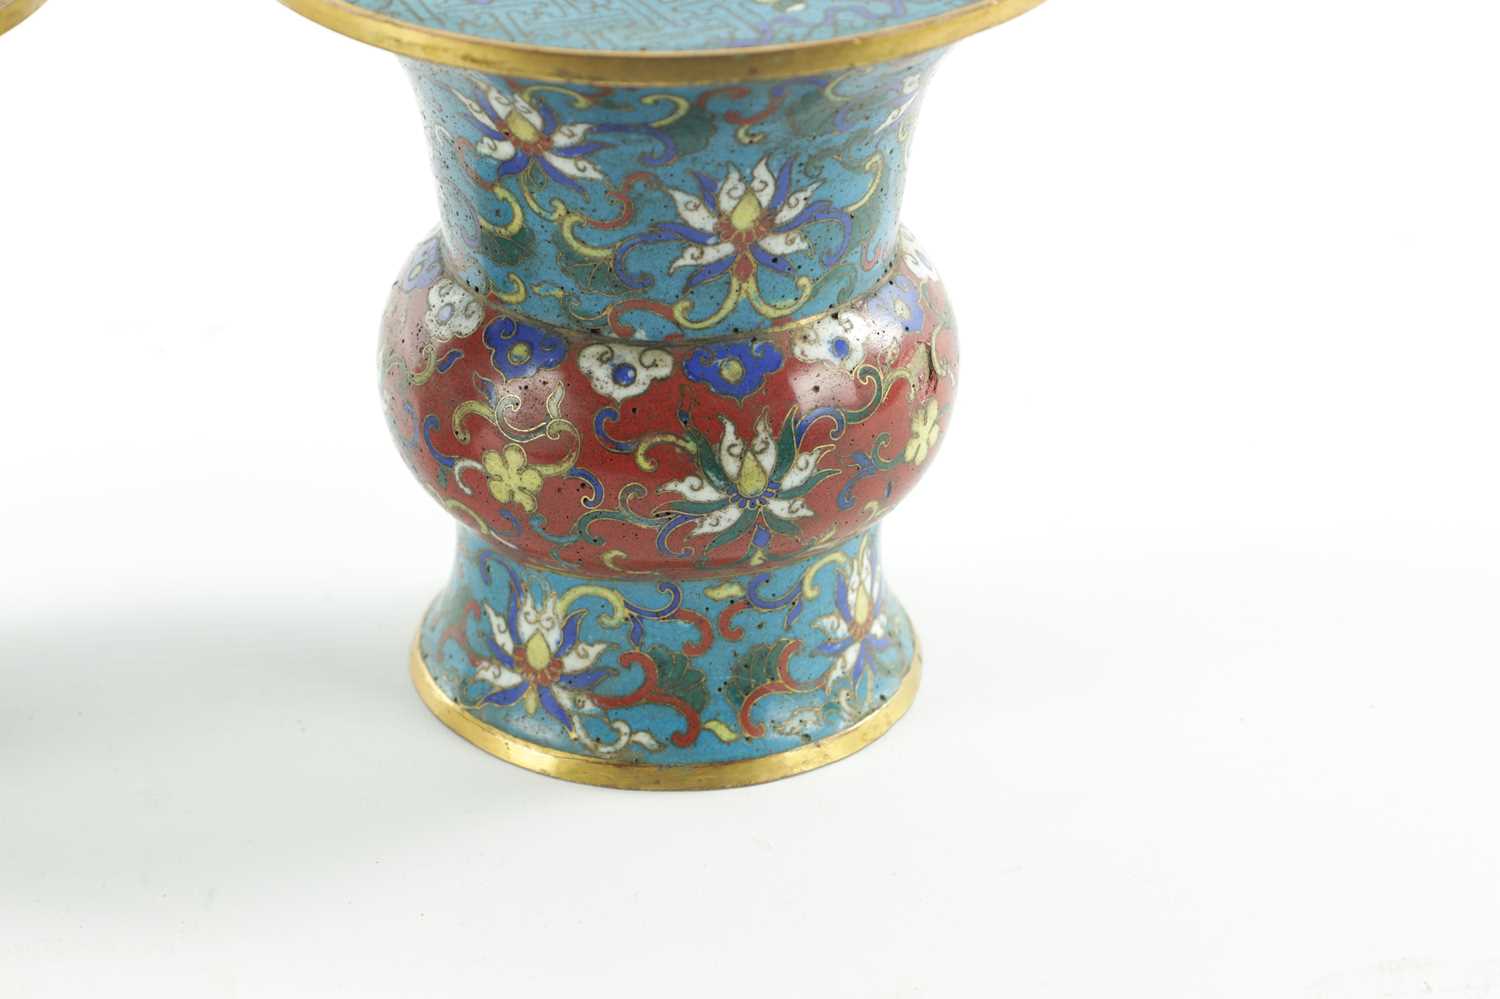 A PAIR OF 18TH CENTURY CHINESE CLOISONNÉ BRUSH POTS - Image 4 of 5